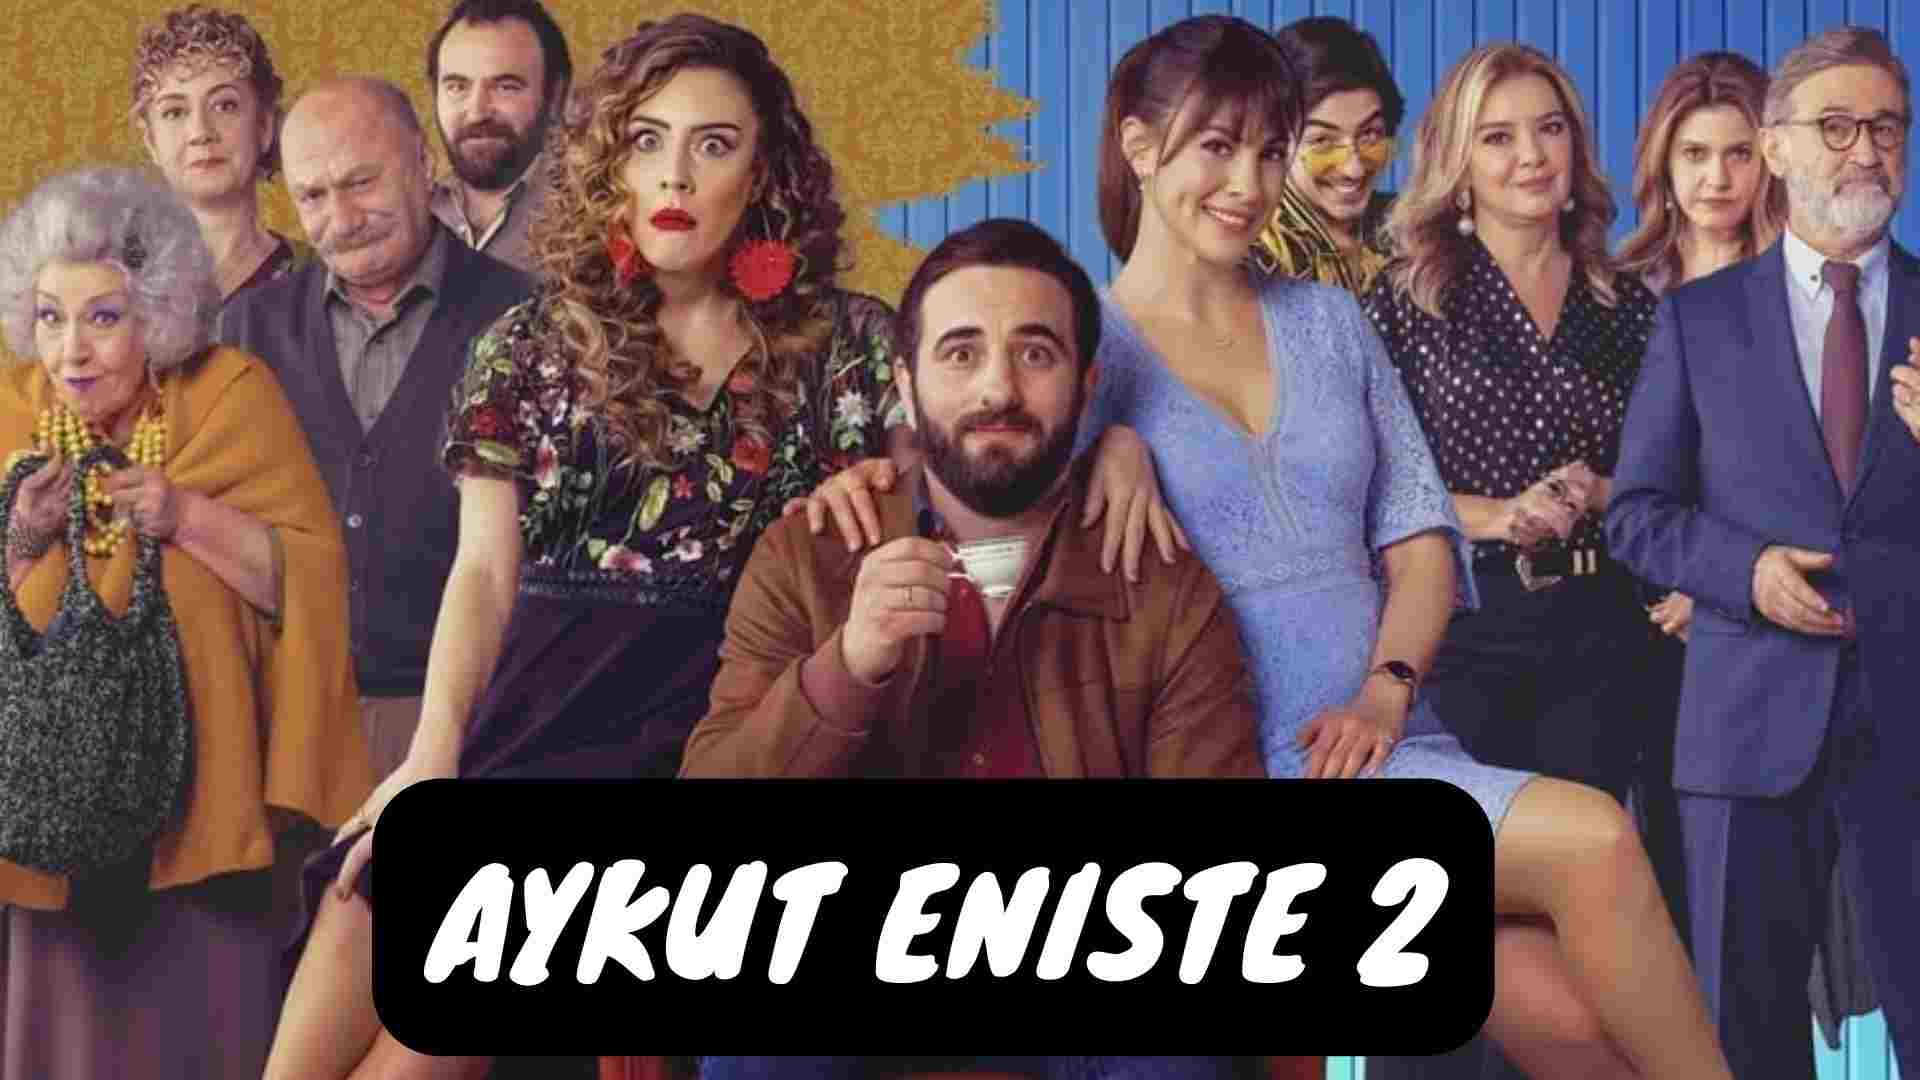 Aykut Eniste 2 Parents Guide and Age Rating | 2021